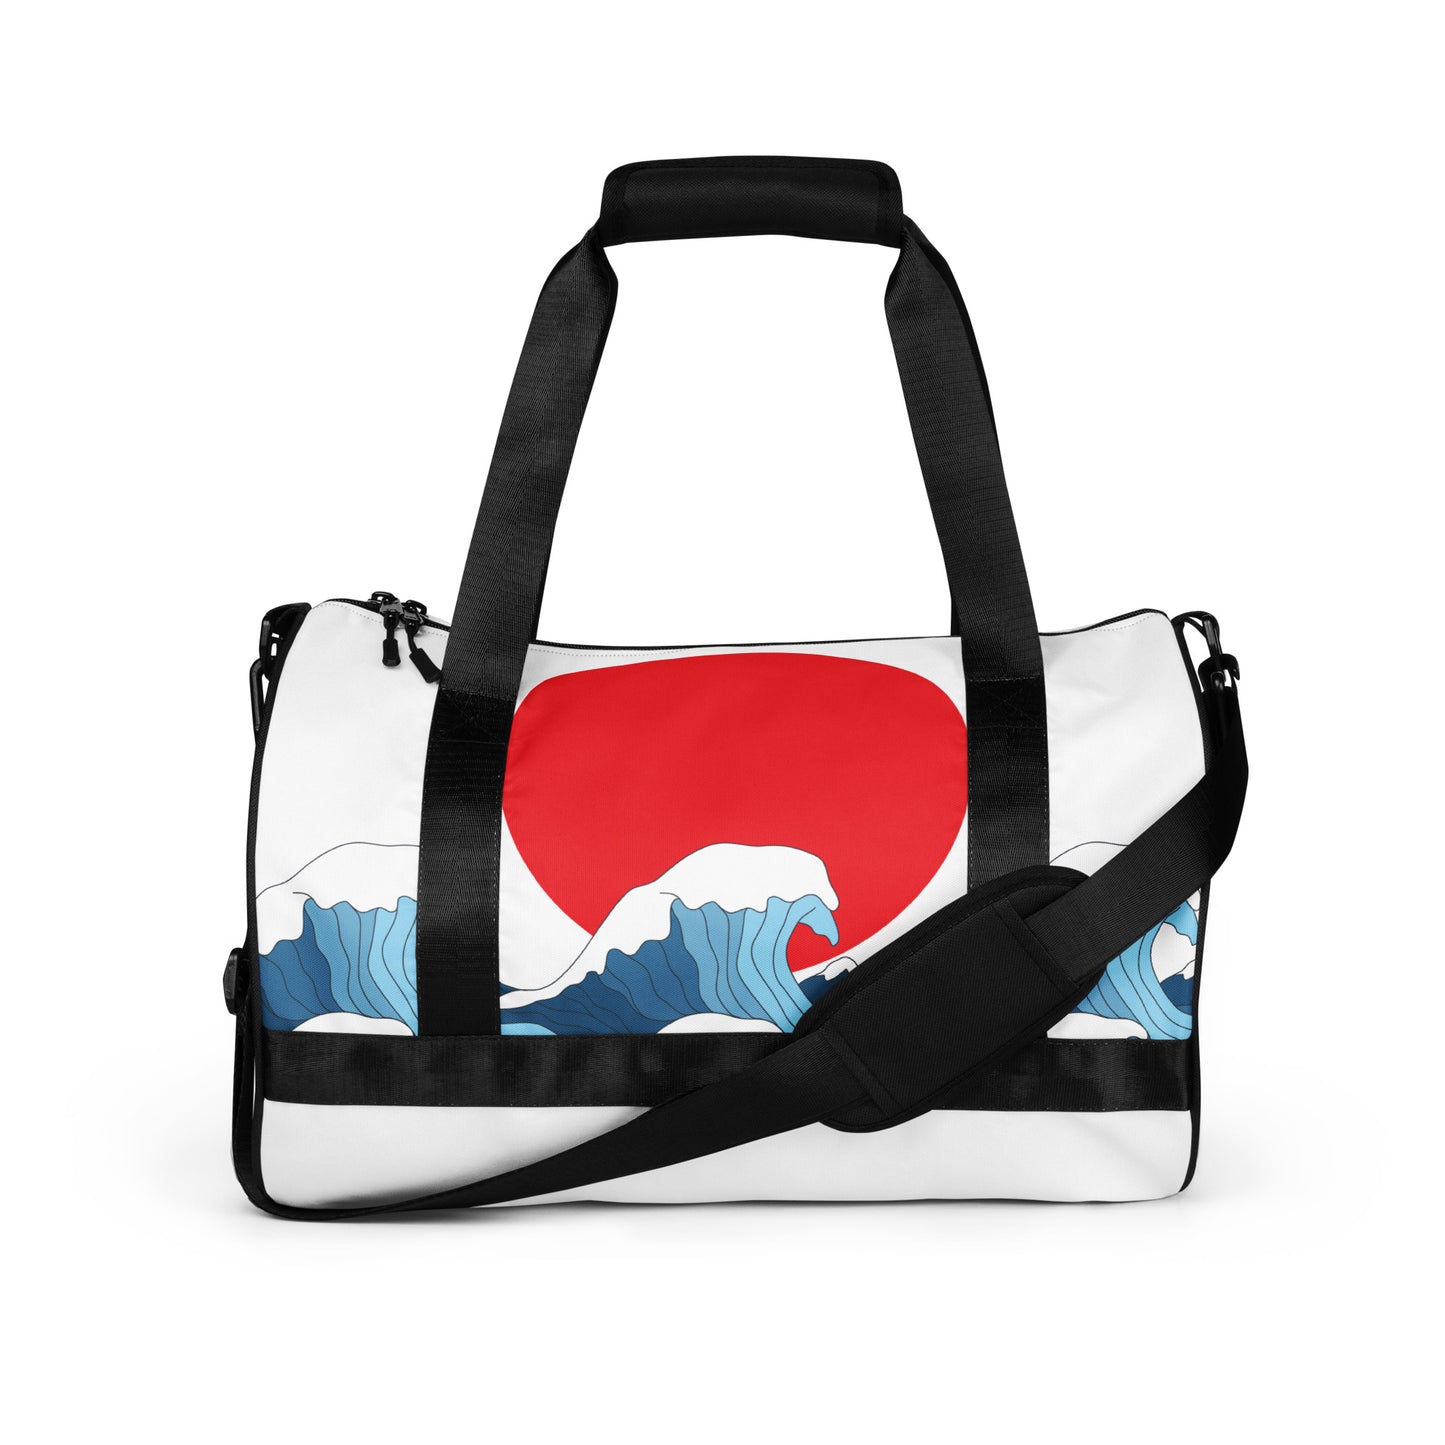 Japan - Sustainably Made Gym Bag